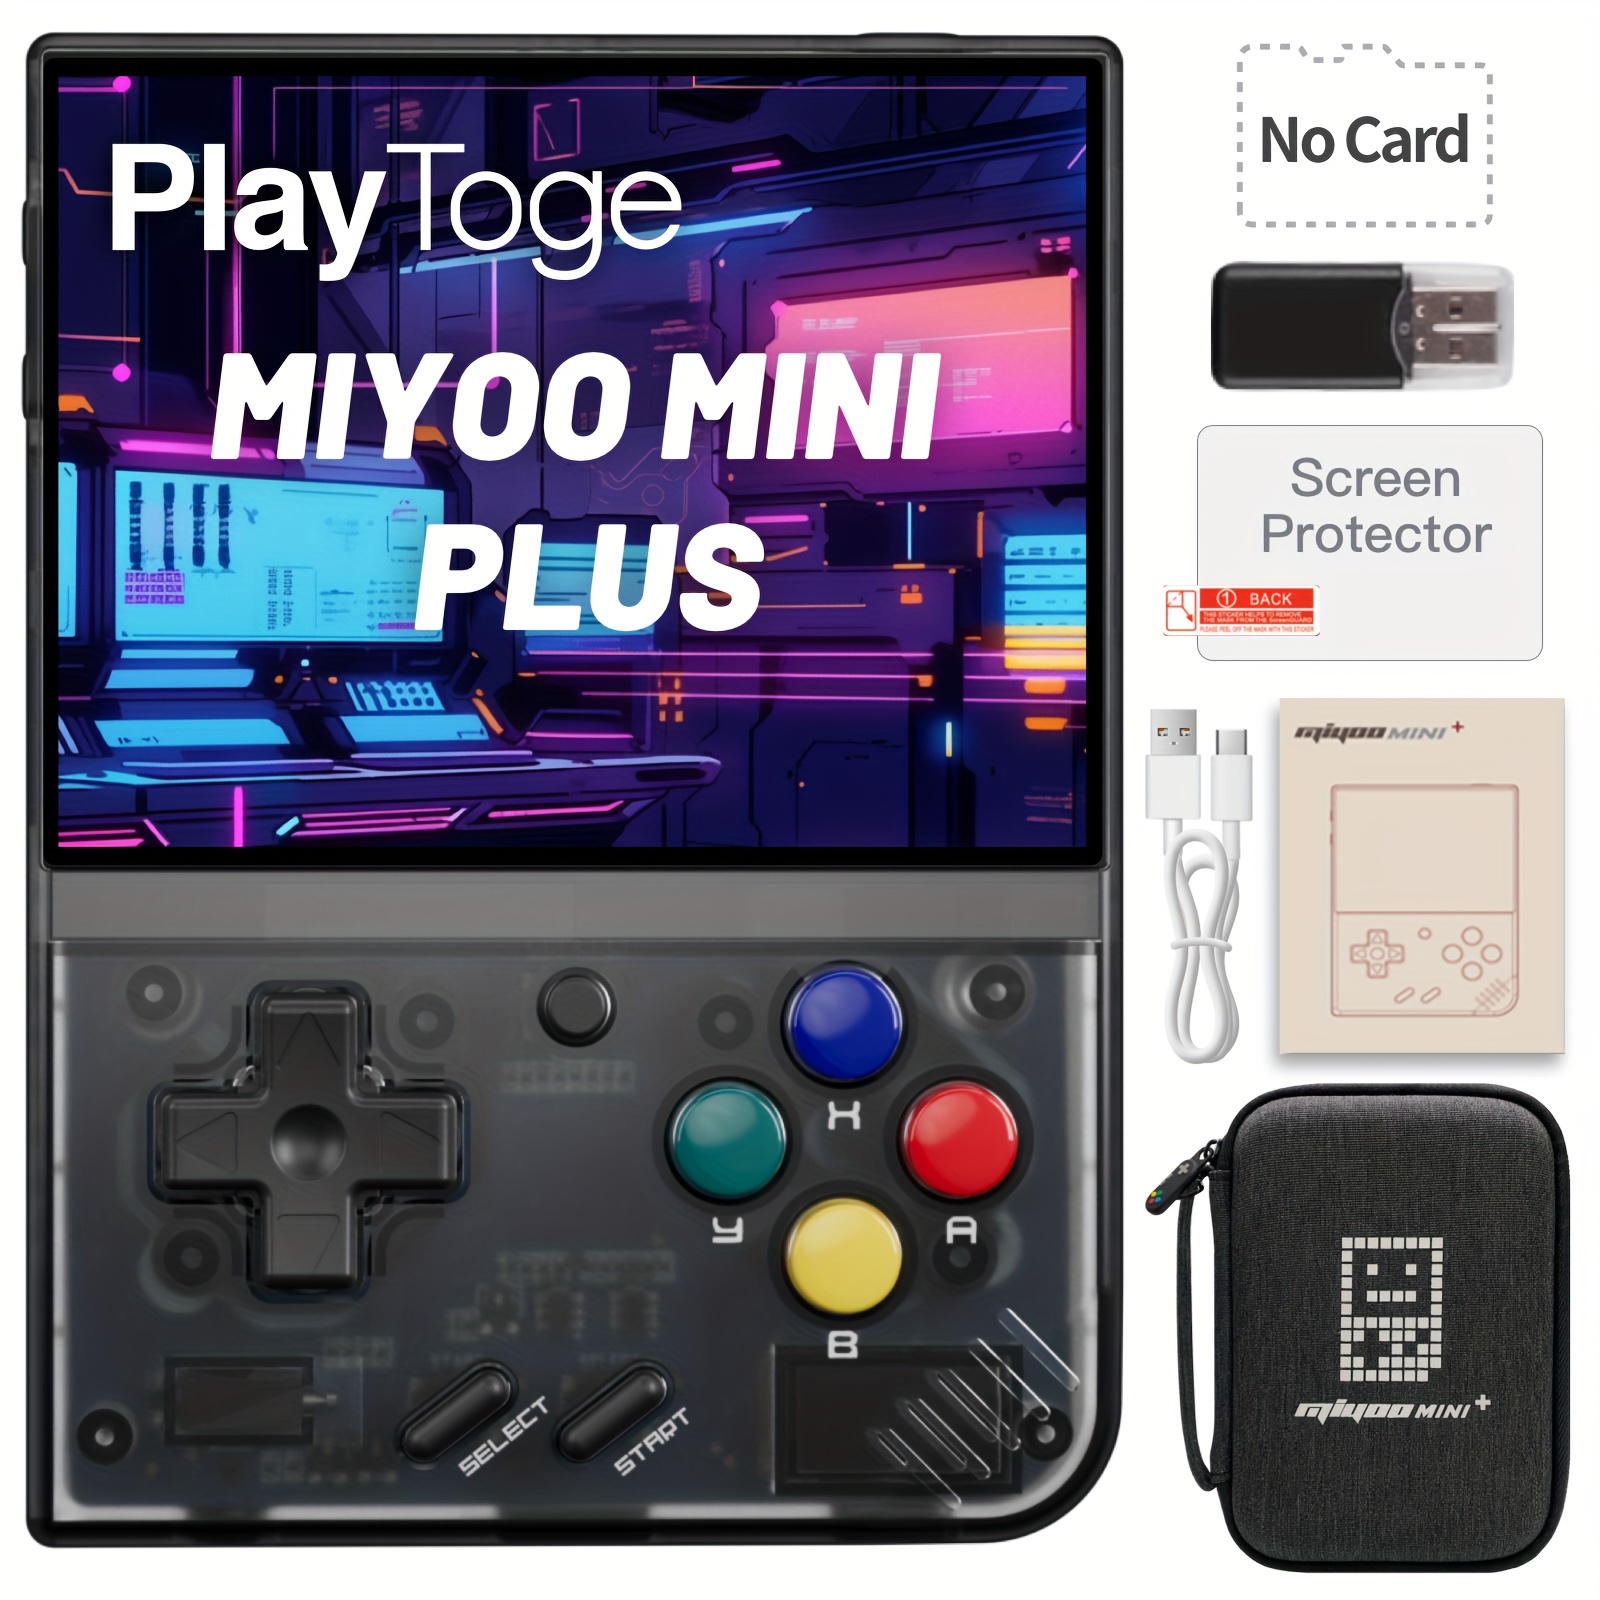  Miyoo Mini Plus Handheld Game Console, with Dedicated Storage  Case, 3.5 Inch IPS 640x480 Screen, 64G TF Card with 10,000+ Games, 3000mAh  7+Hours Battery, Support Wireless Network (Black 64G+Case) : Toys